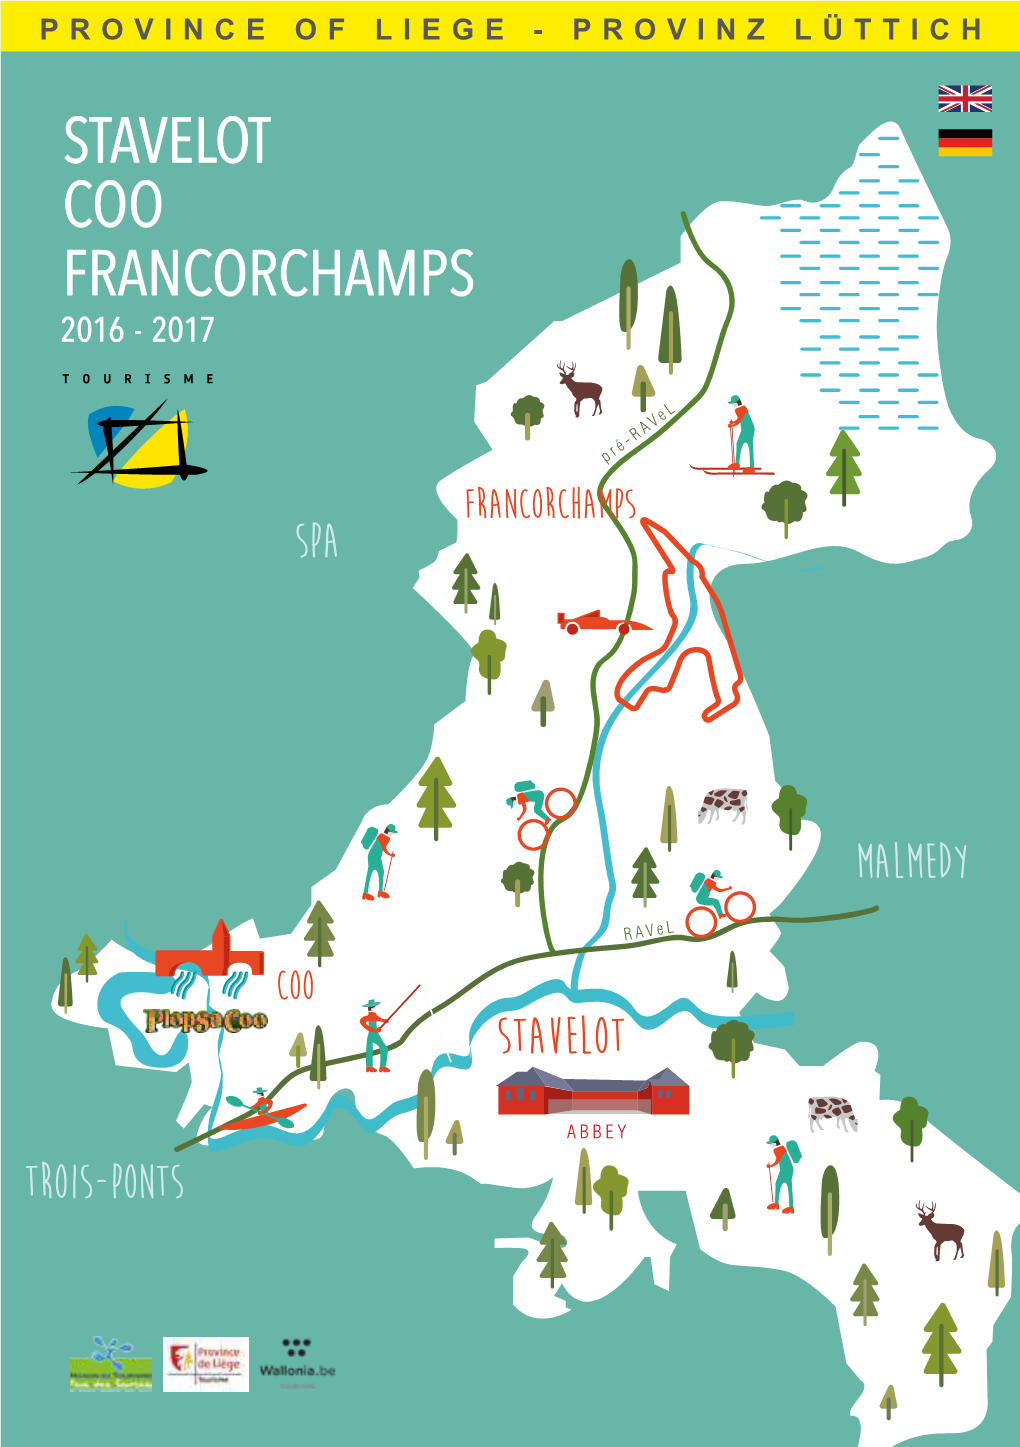 Stavelot Coo Francorchamps 2016 - 2017